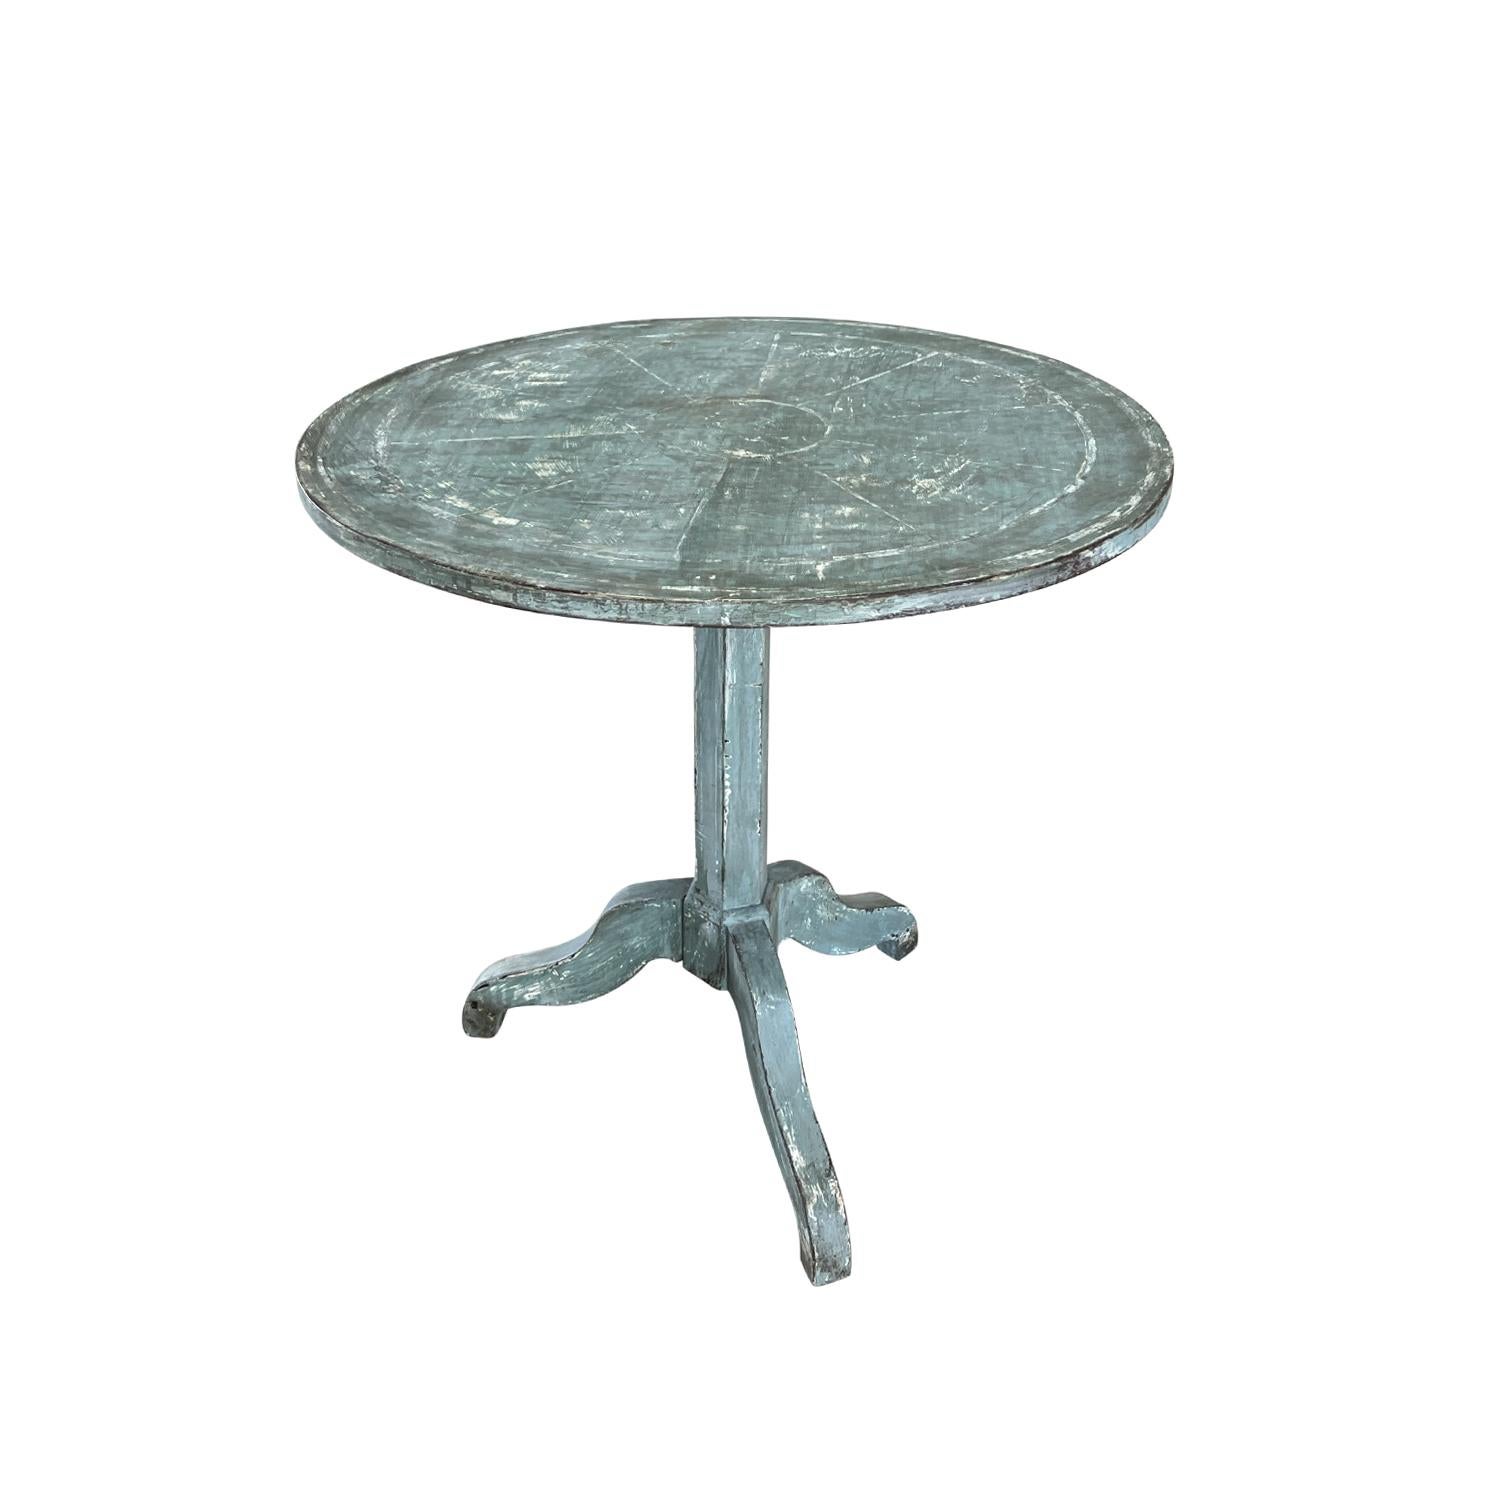 An original, antique French Gueridon table from the Napoleon III period. The round top is made of hand crafted painted Pinewood and the chassis is a tripod. In original condition with visible wear and heavy patina. Wear consistent with age and use.